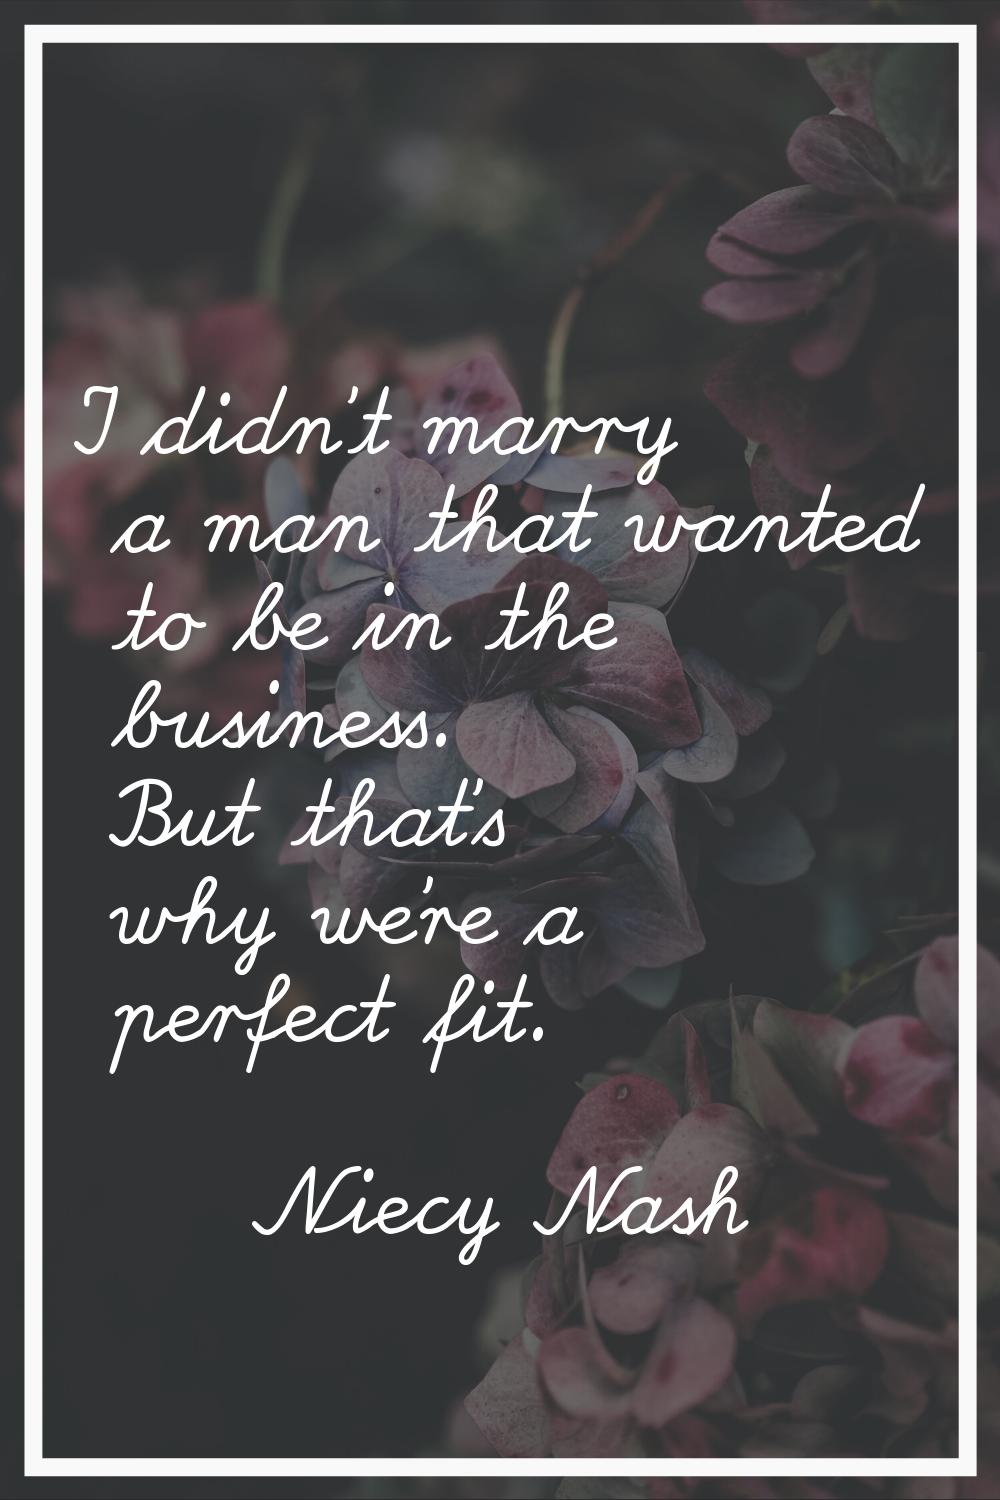 I didn't marry a man that wanted to be in the business. But that's why we're a perfect fit.